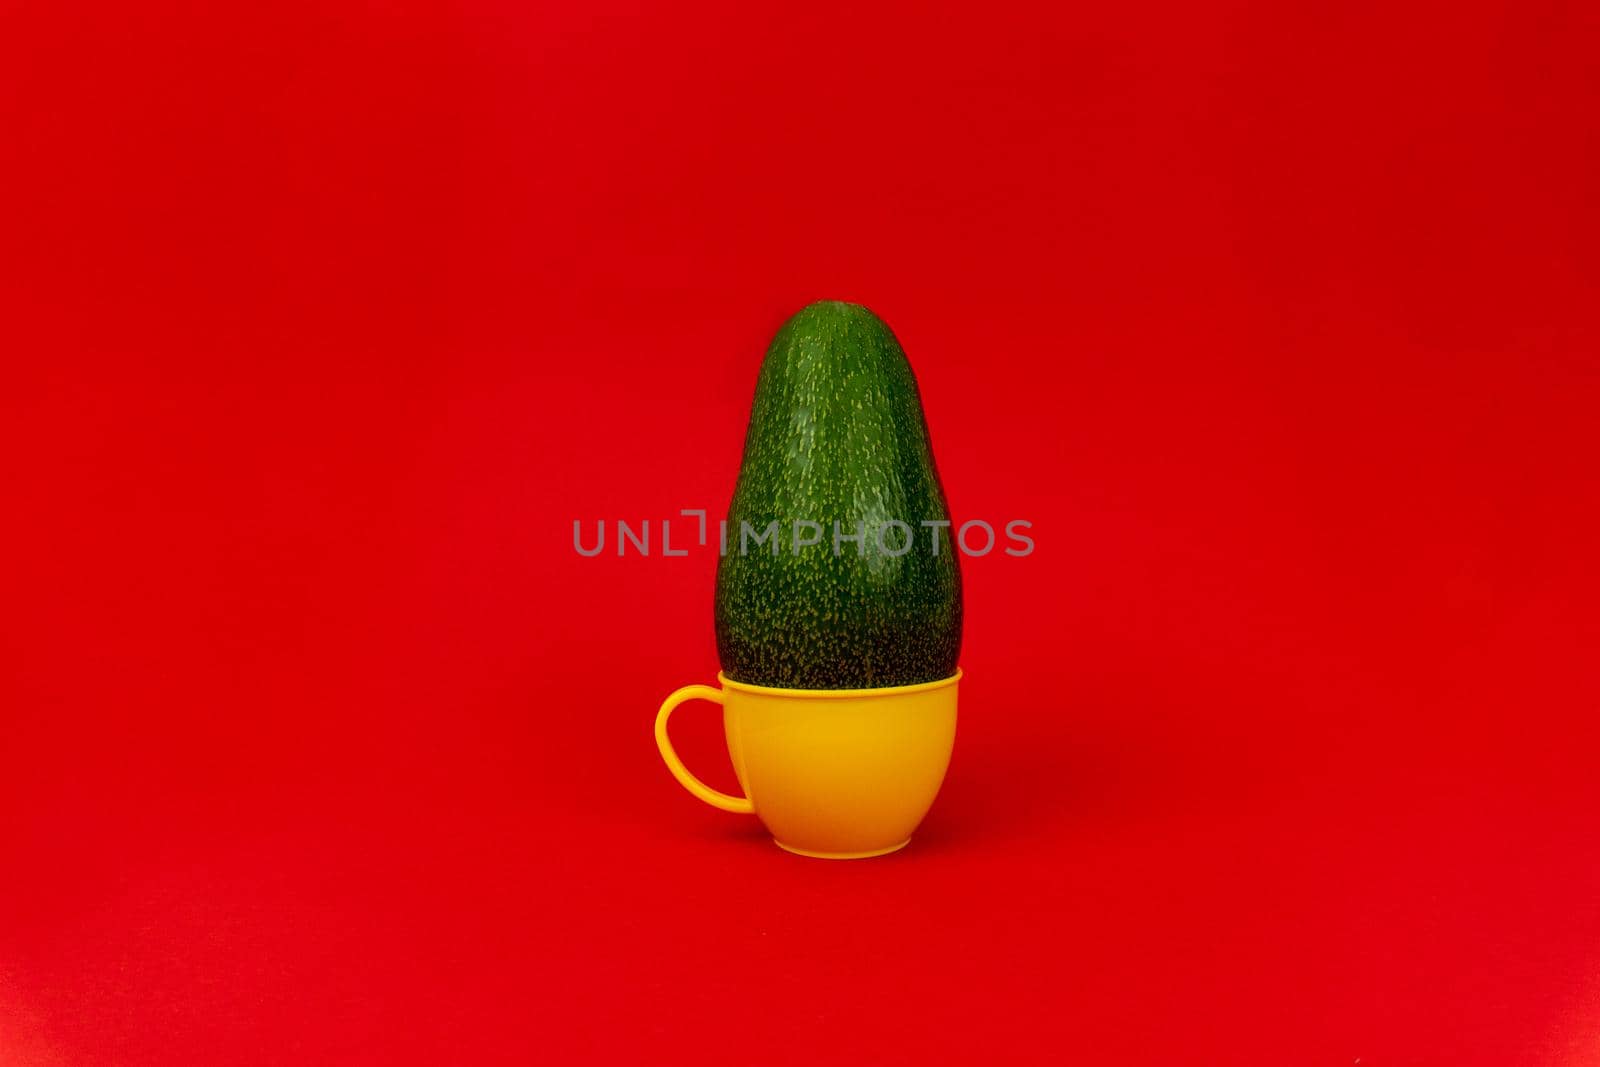 Green avocado in a plastic yellow mug in red background, minimalistic concept, enough space for text.